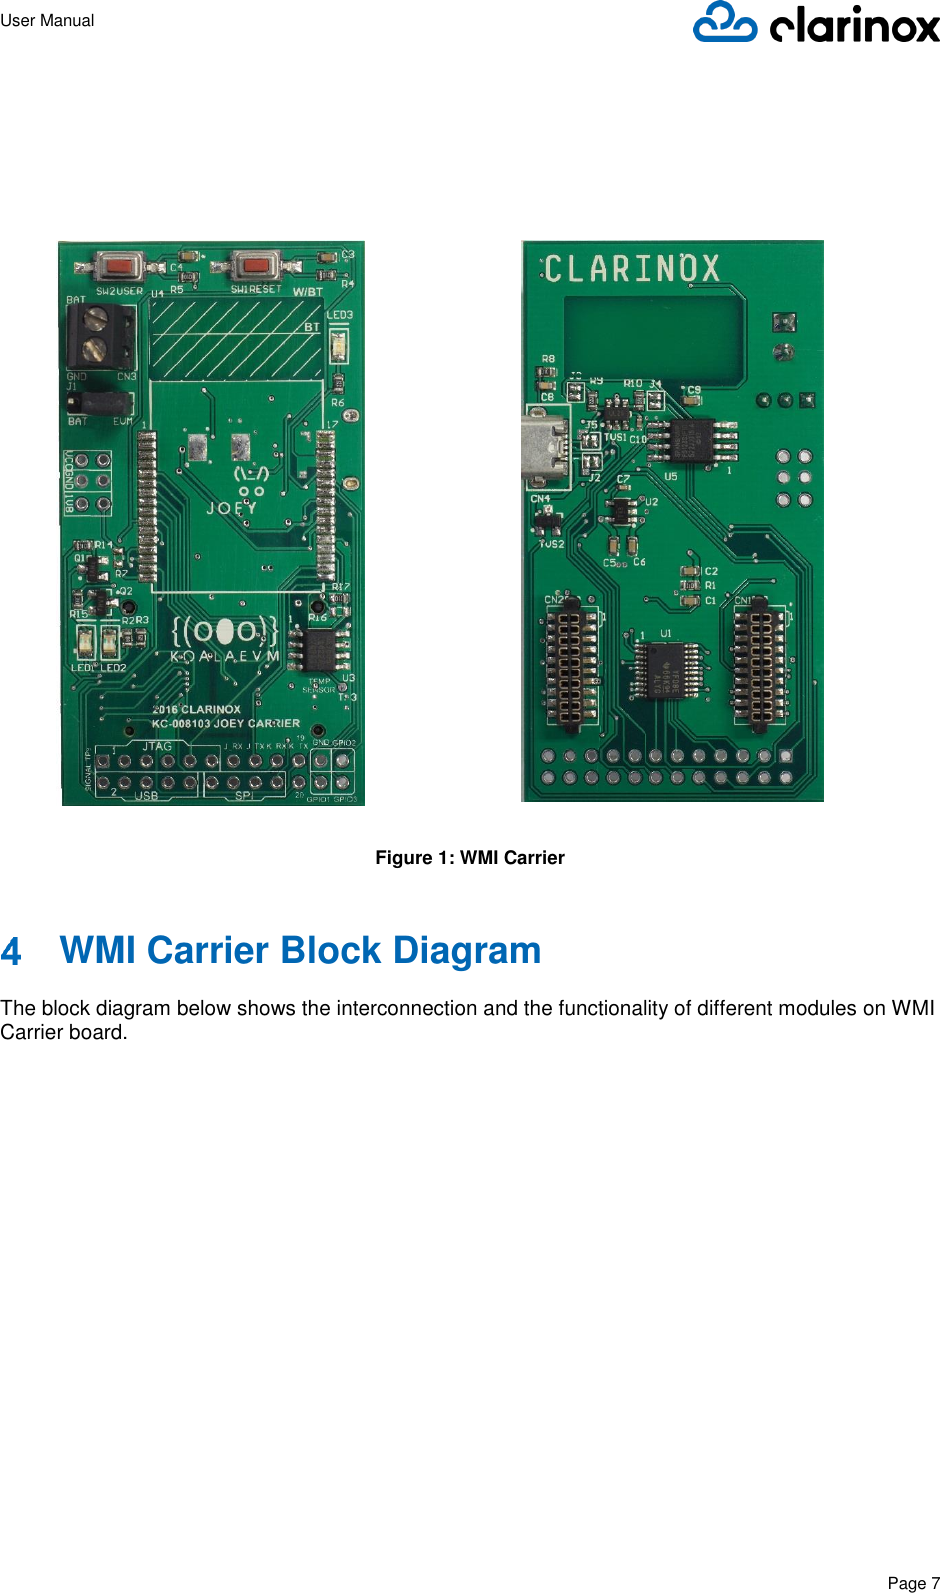 User Manual      Page 7                          Figure 1: WMI Carrier   WMI Carrier Block Diagram  The block diagram below shows the interconnection and the functionality of different modules on WMI Carrier board.   